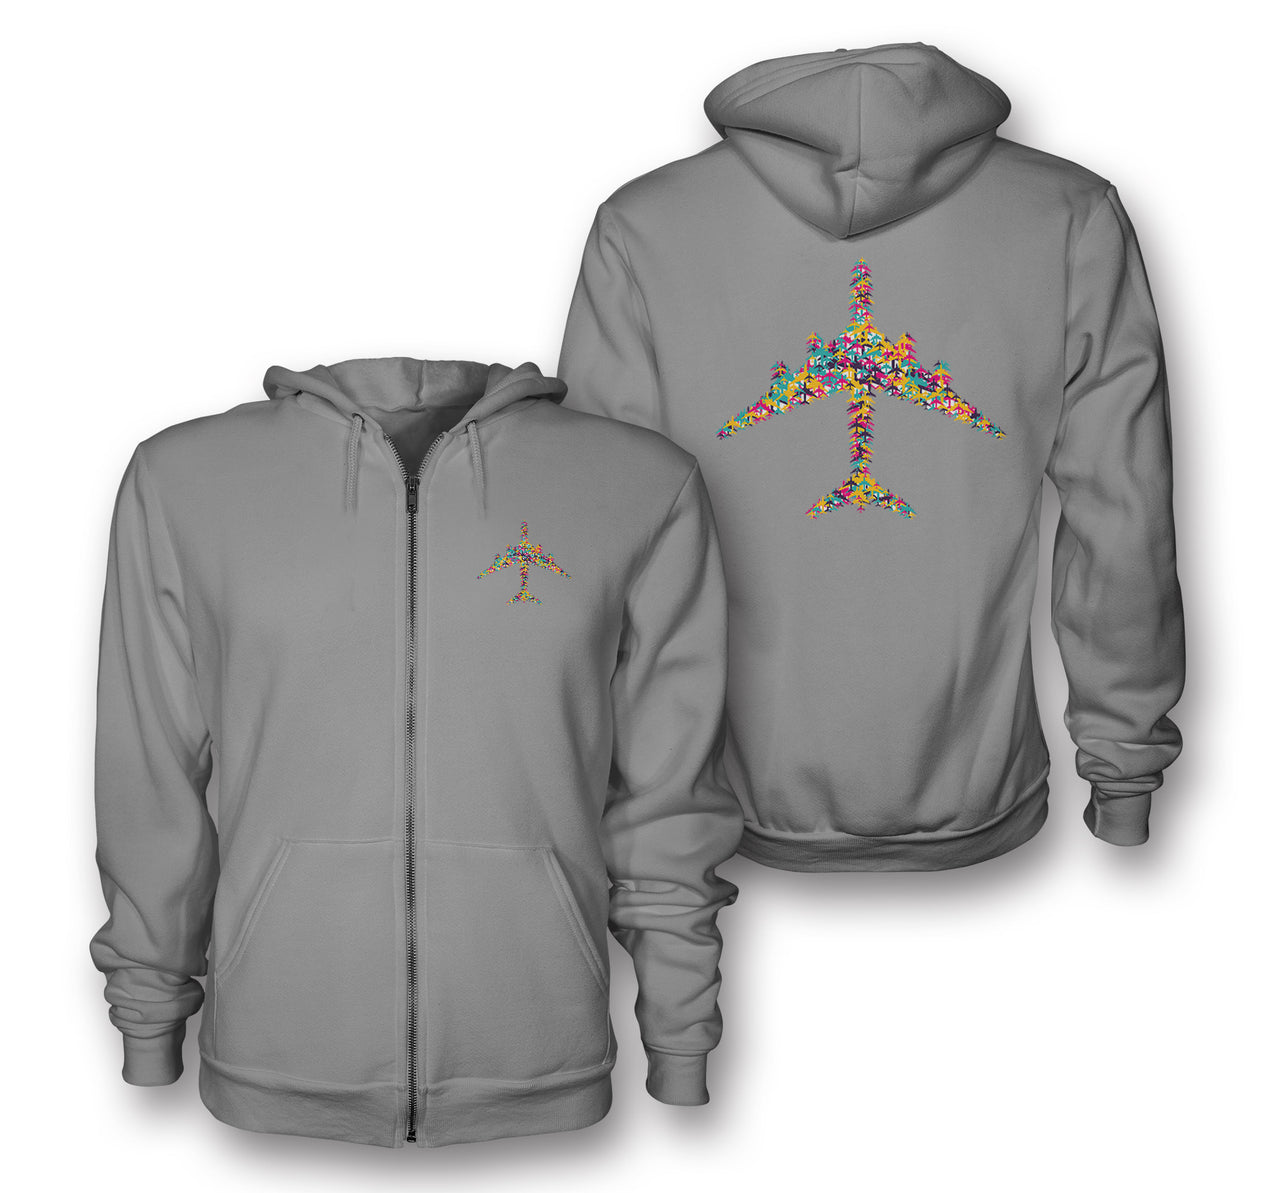 Colourful Airplane Designed Zipped Hoodies